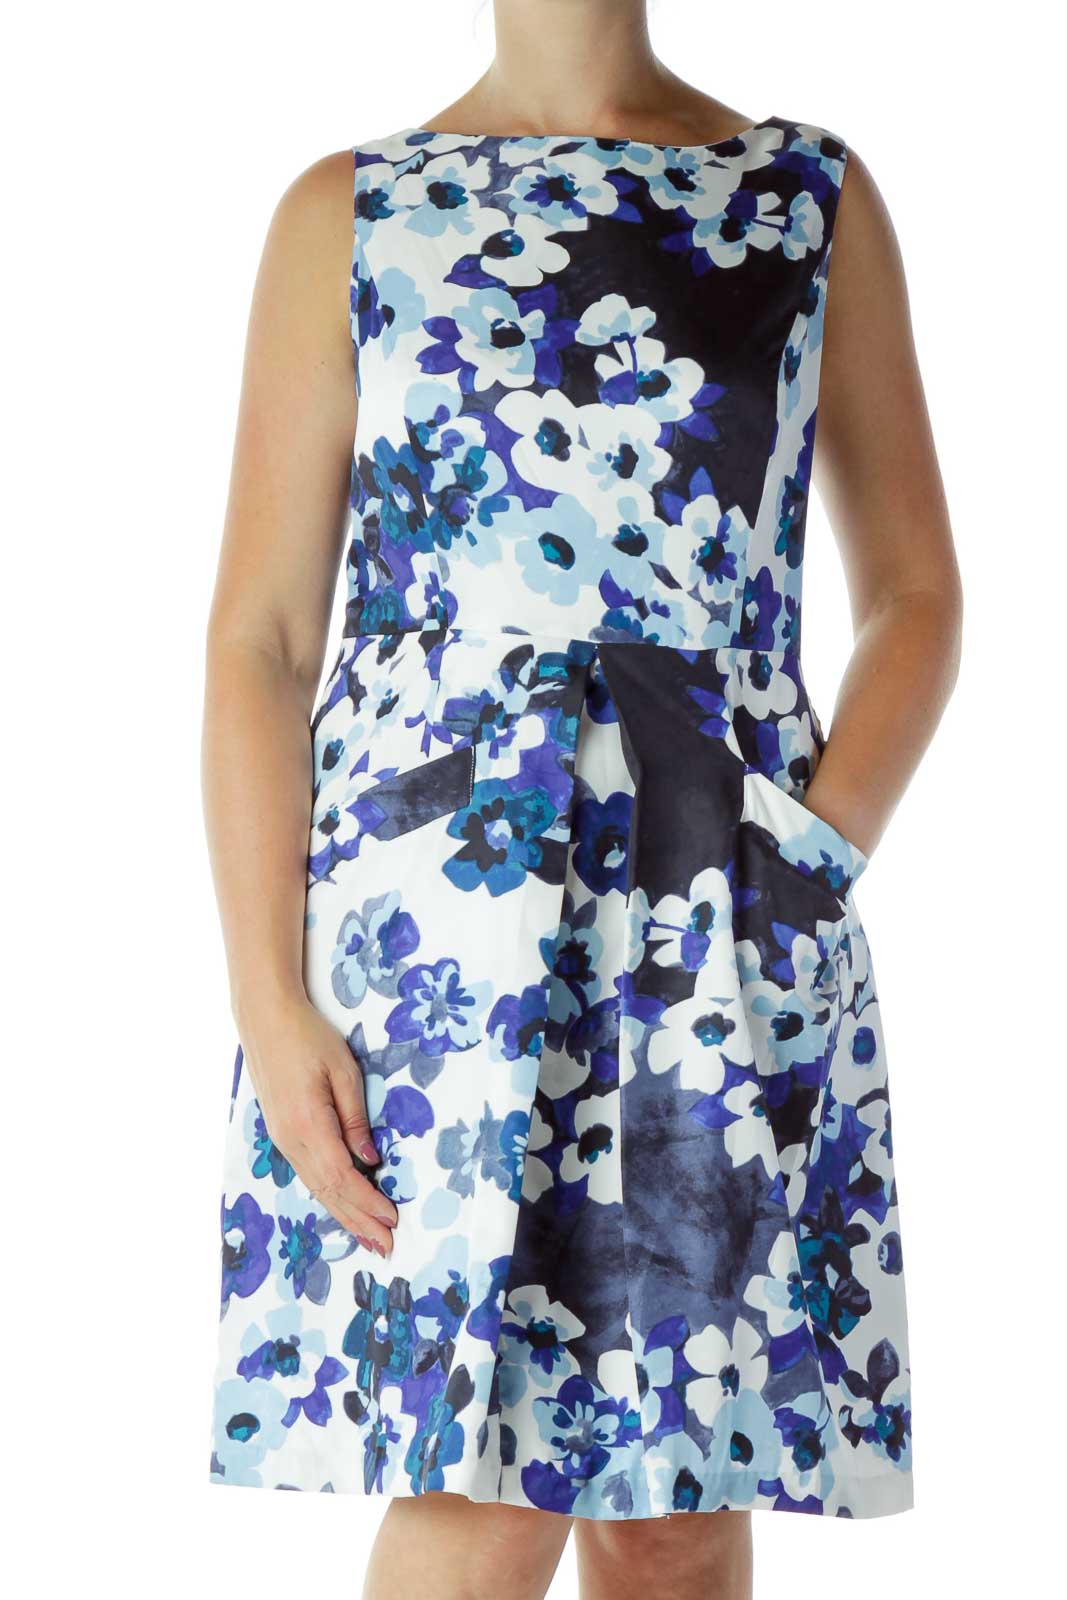 White & Blue Floral Work Dress Front